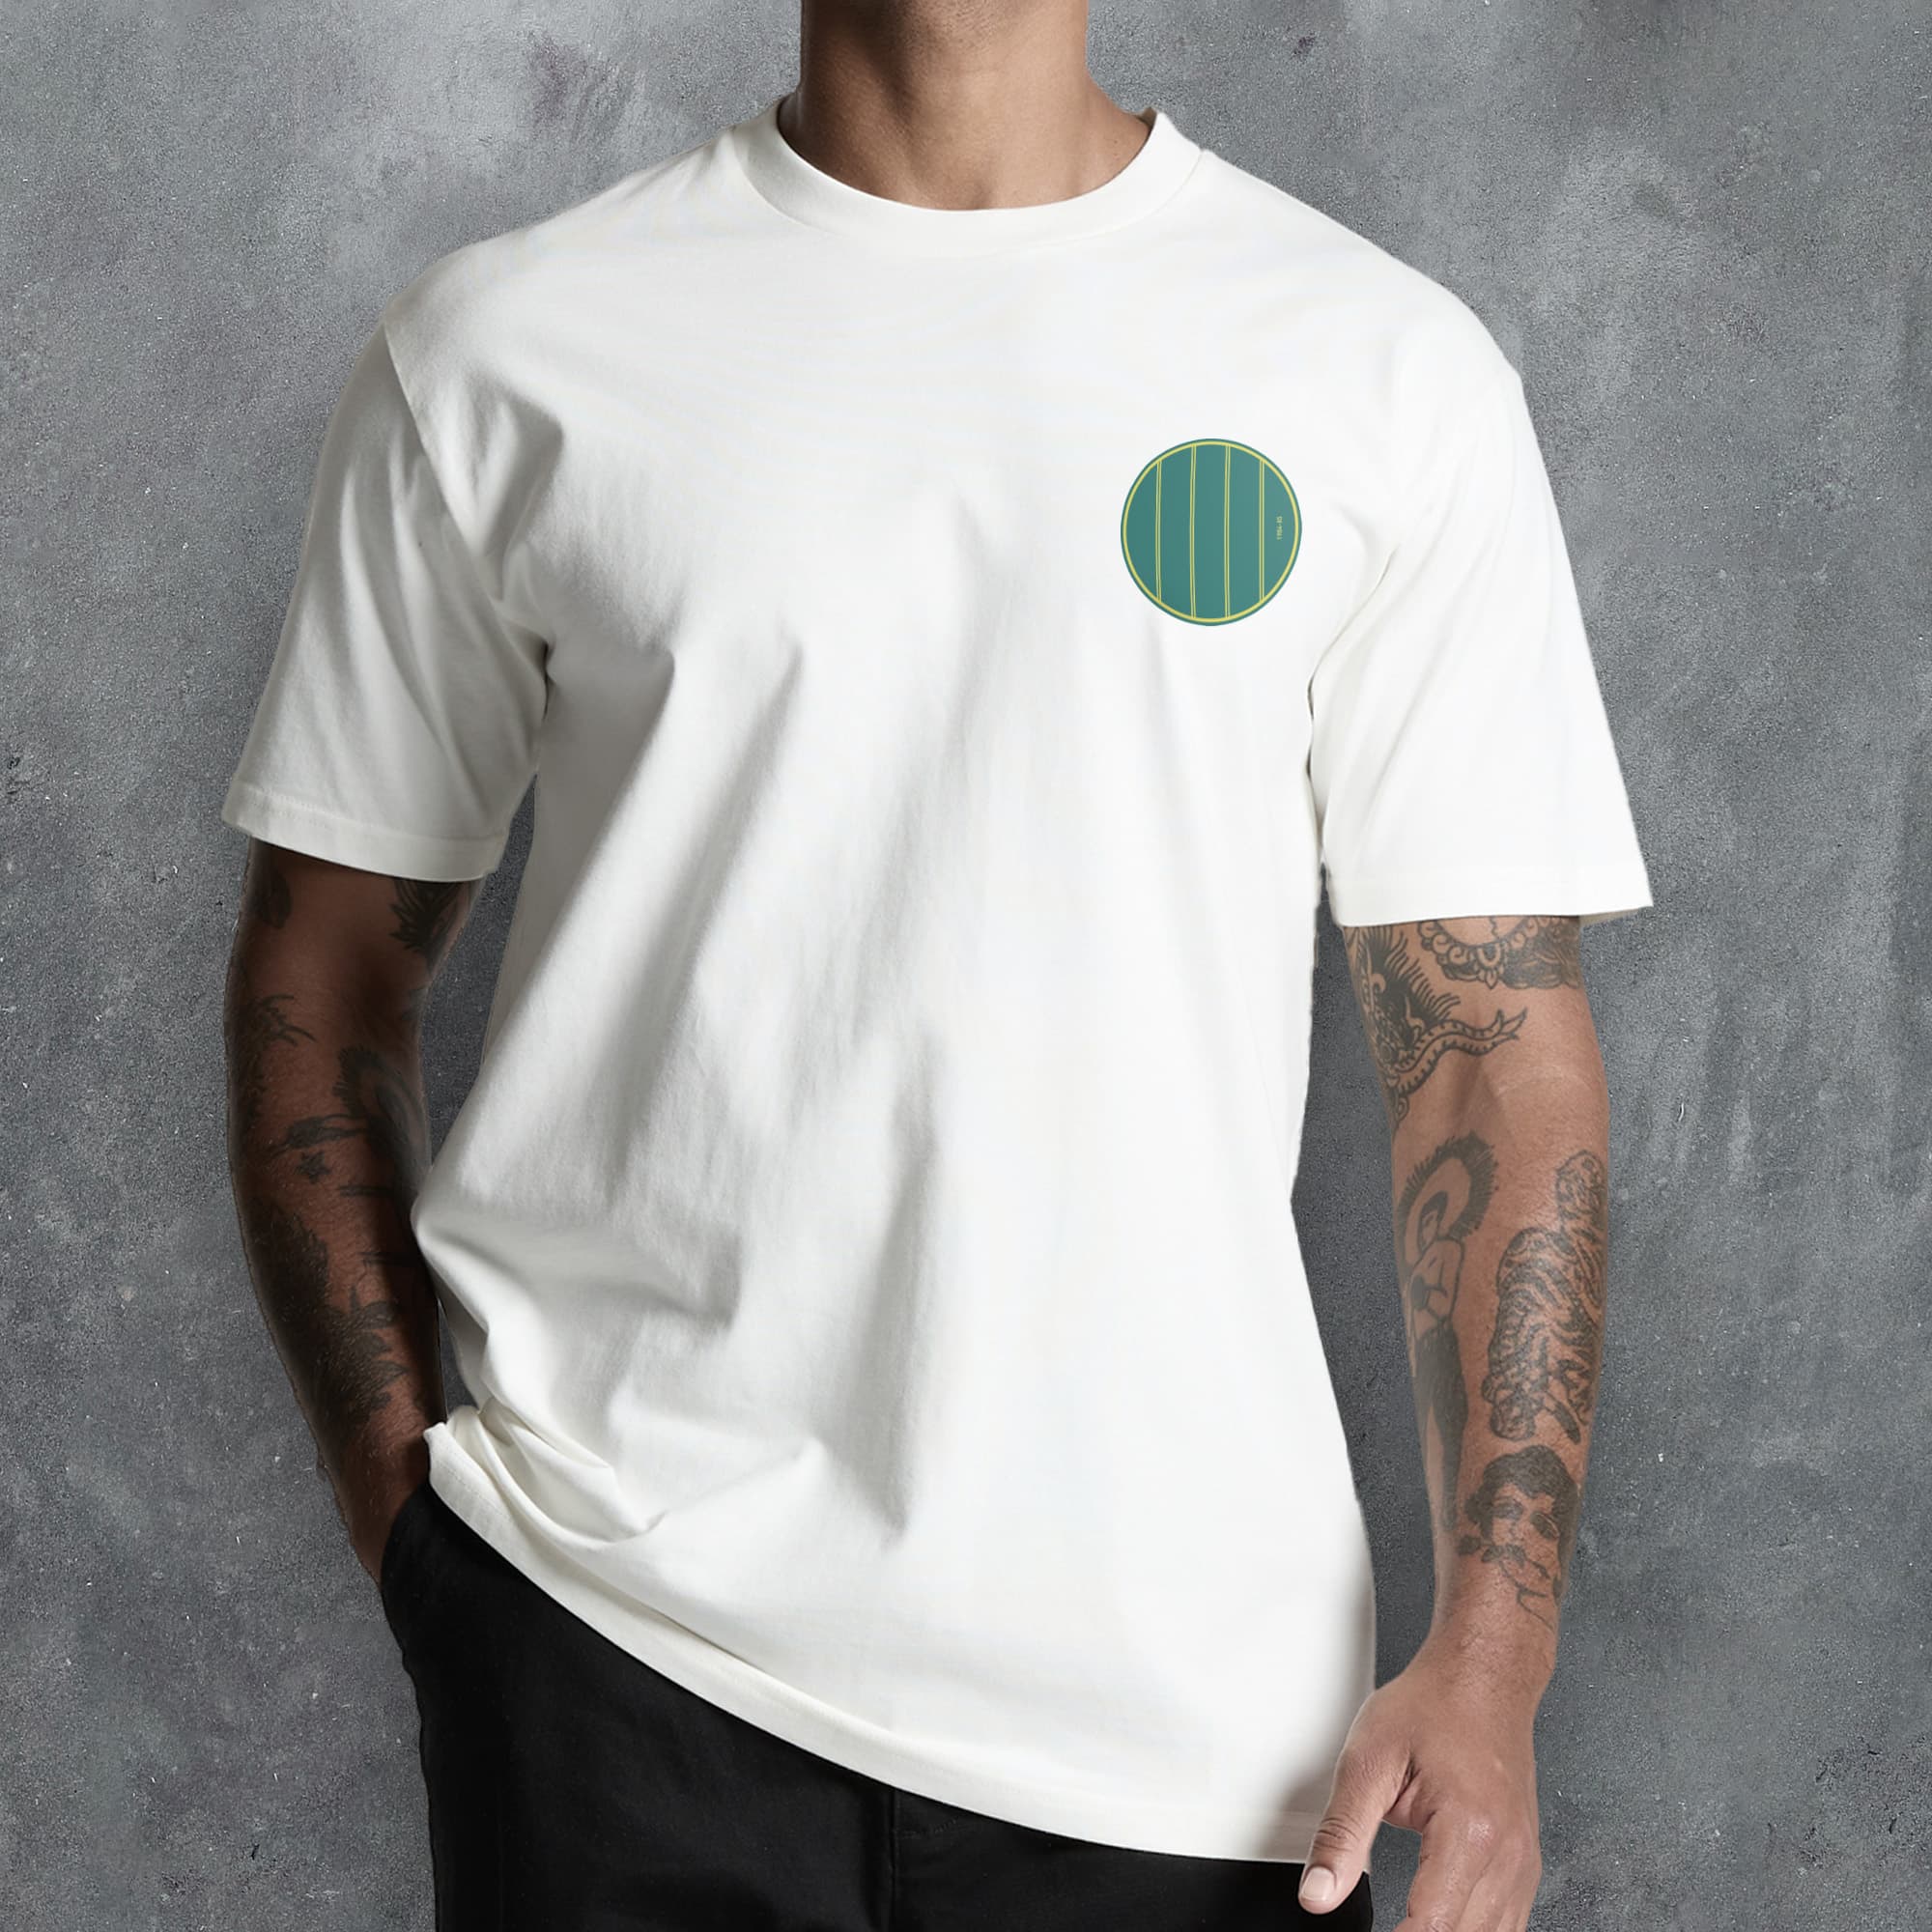 a man wearing a white t - shirt with a green circle on it